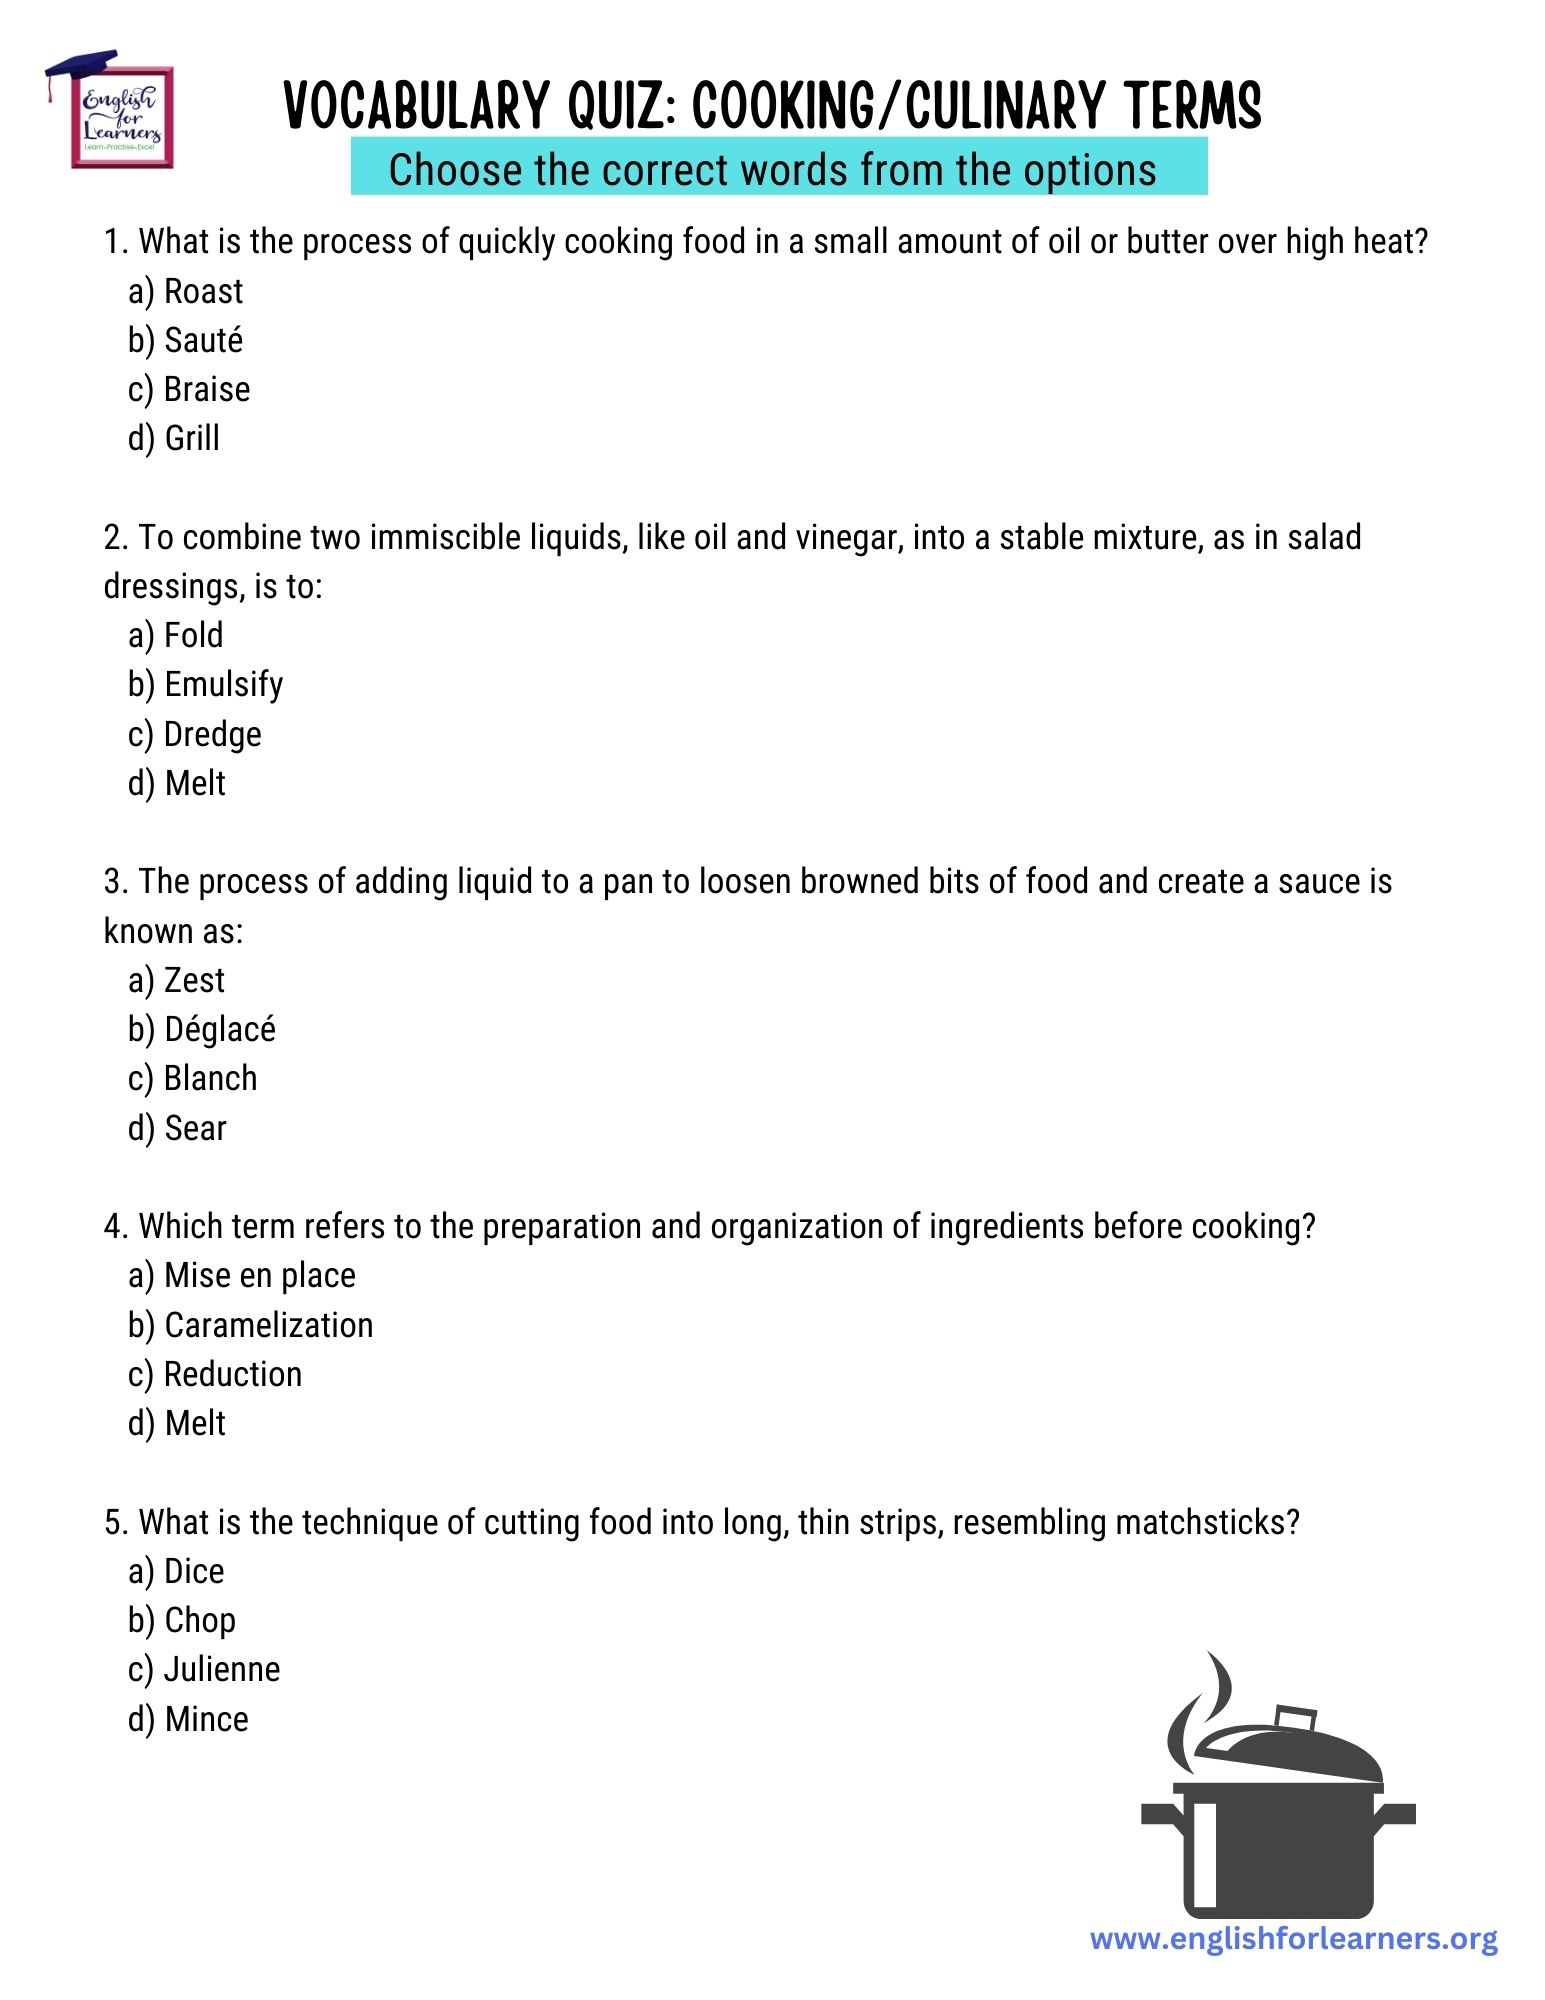 cooking terms, vocabulary quiz related to cooking, cooking terms quiz, culinary words